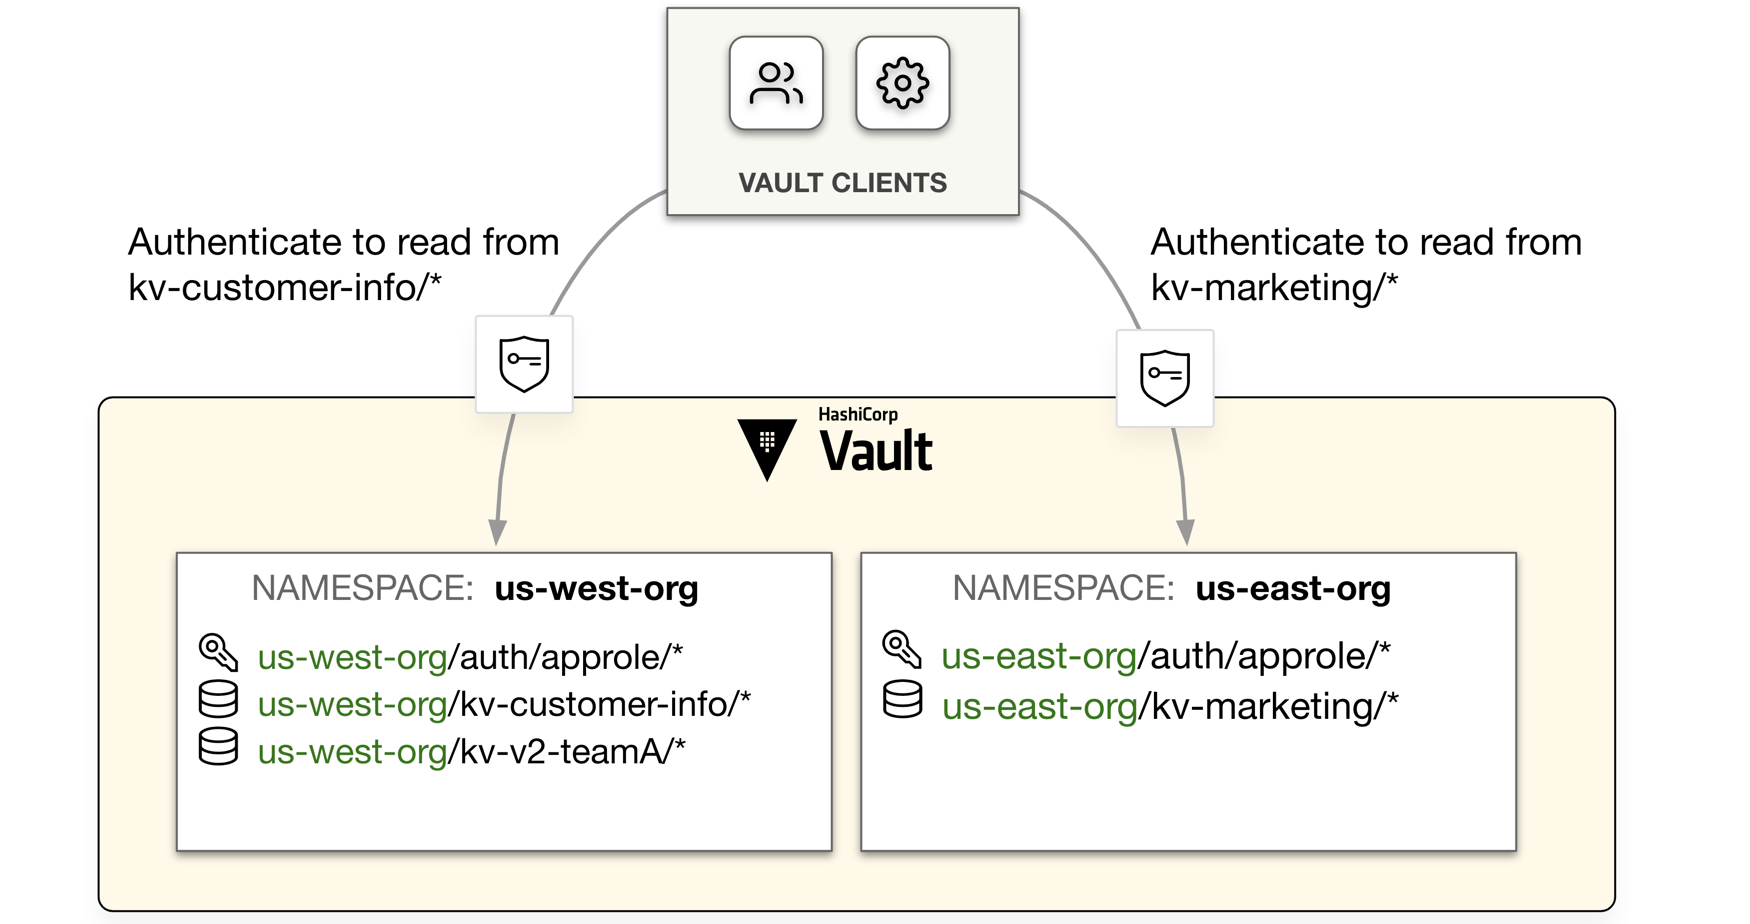 Client access to namespaces